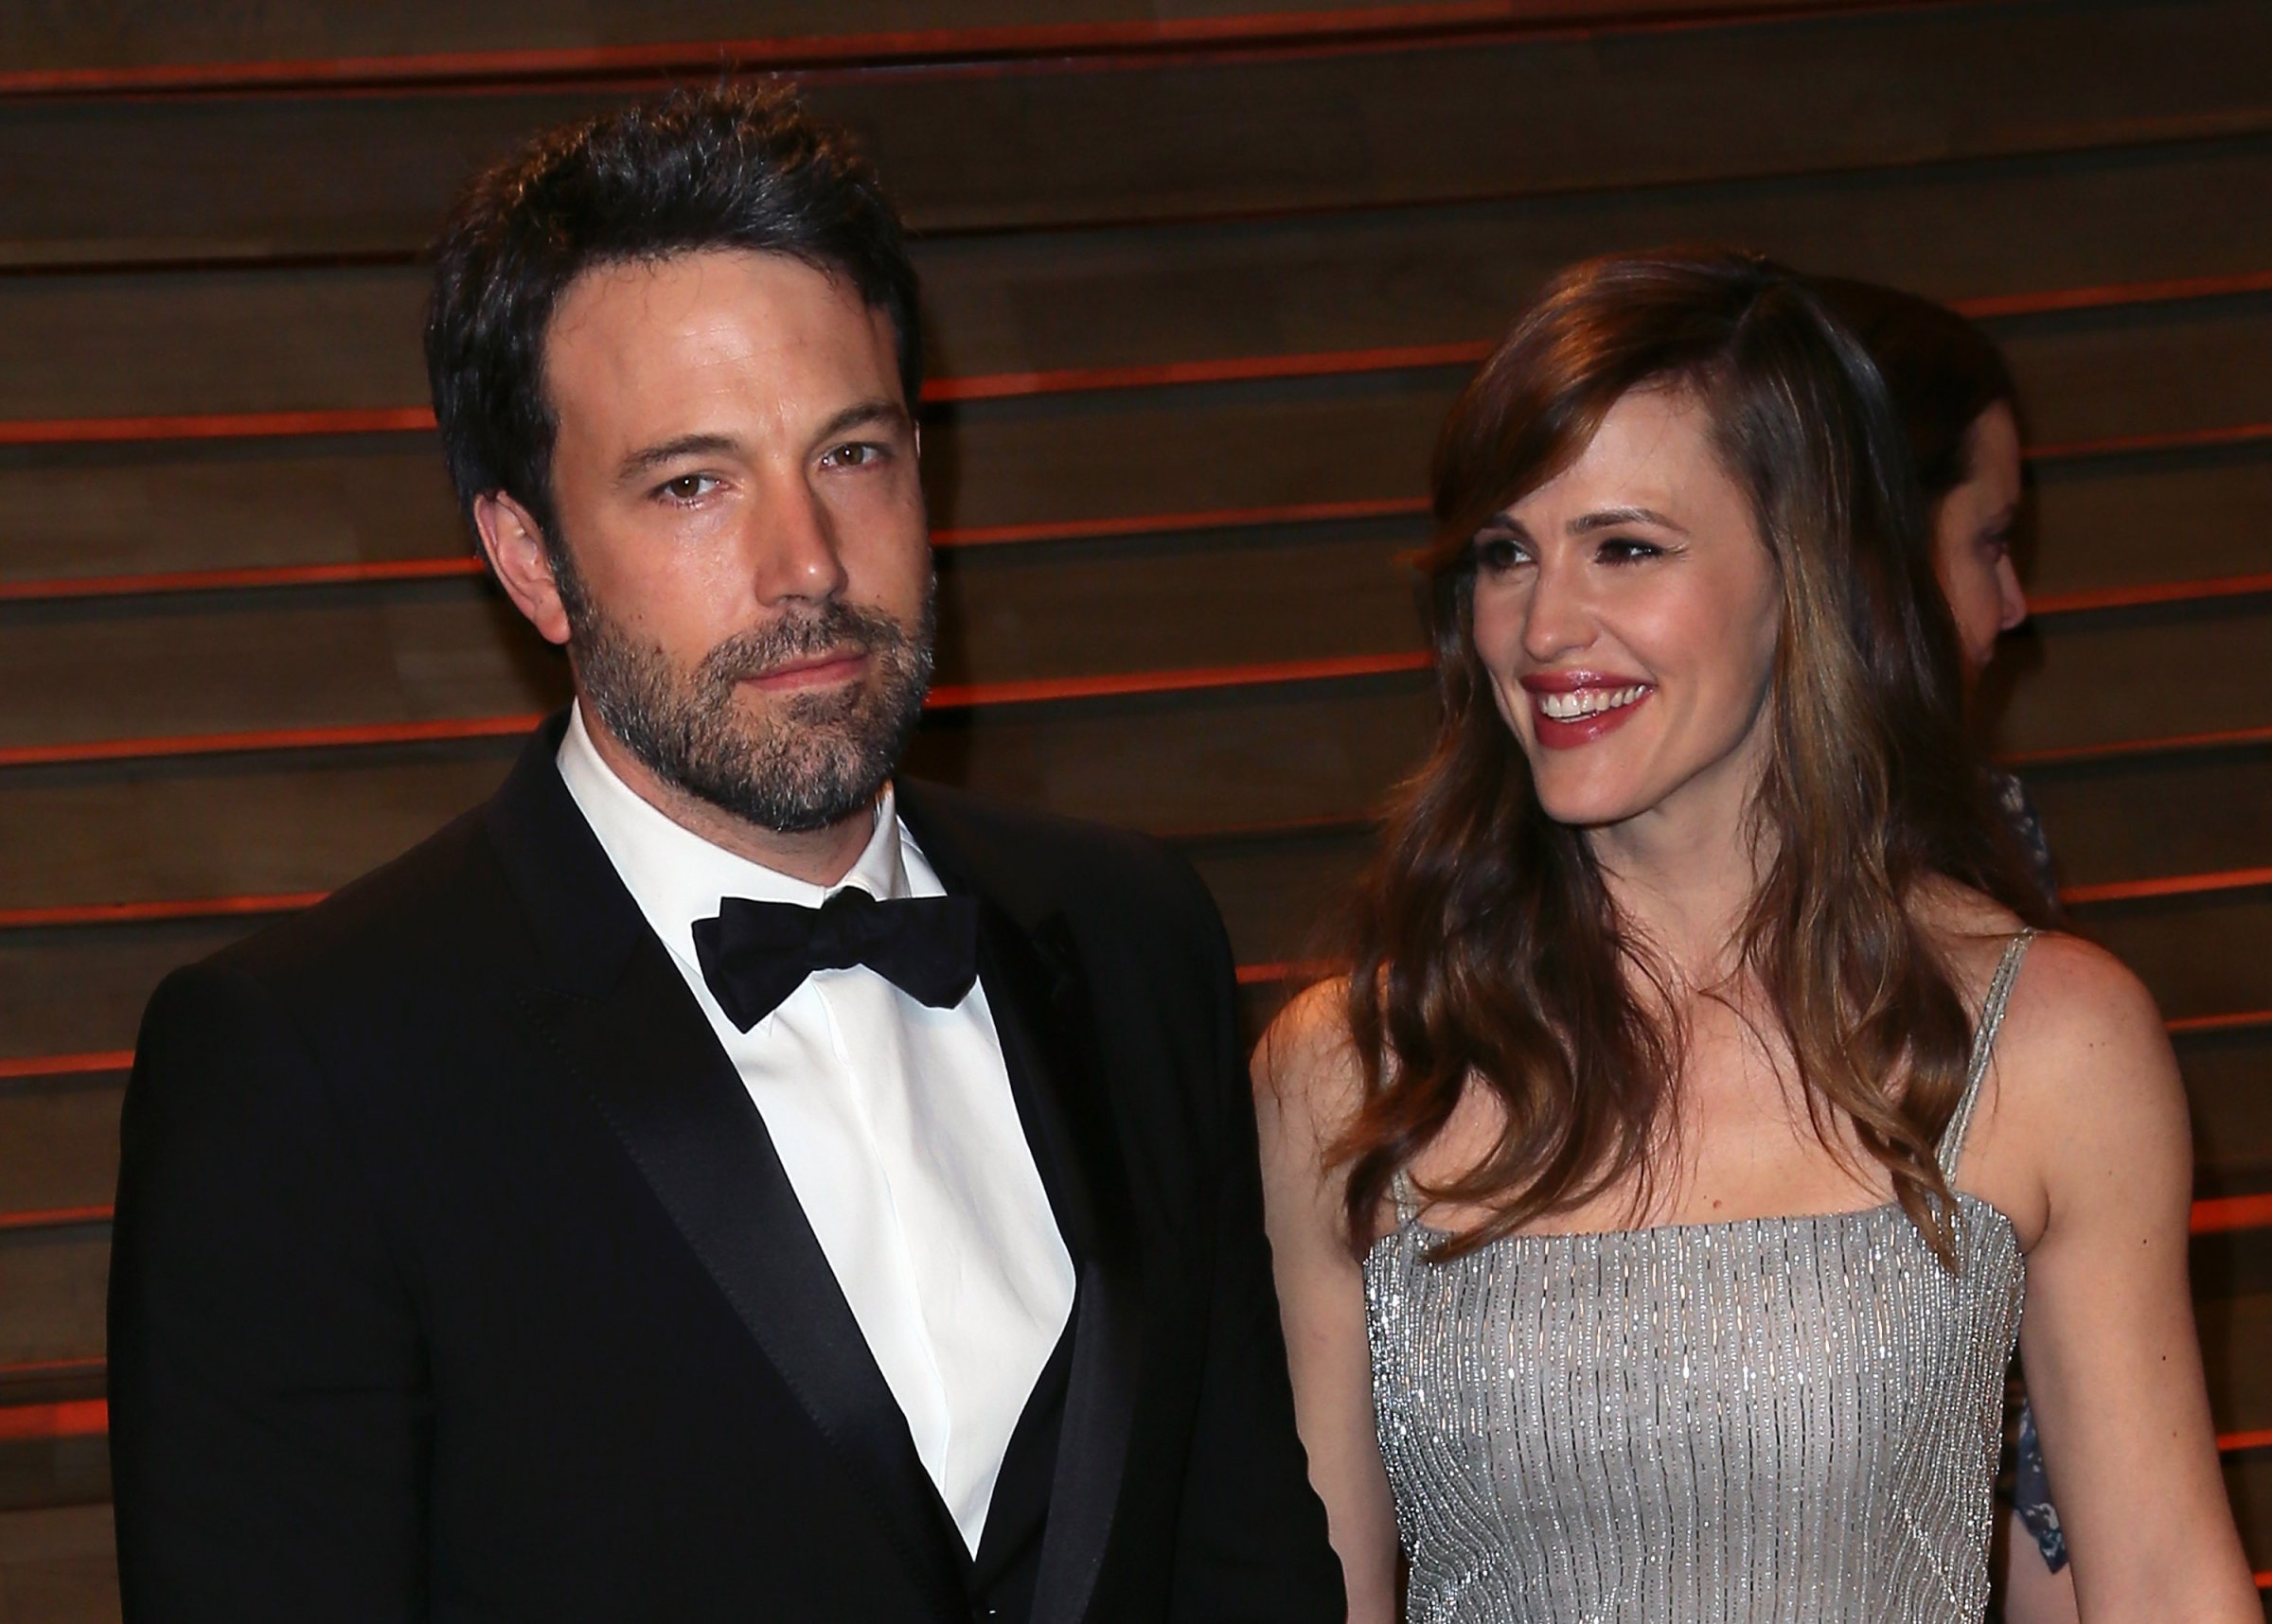 Actor/director Ben Affleck and actress Jennifer Garner attend the 2014 Vanity Fair Oscar Party hosted by Graydon Carter on March 2, 2014 in West Hollywood, California.